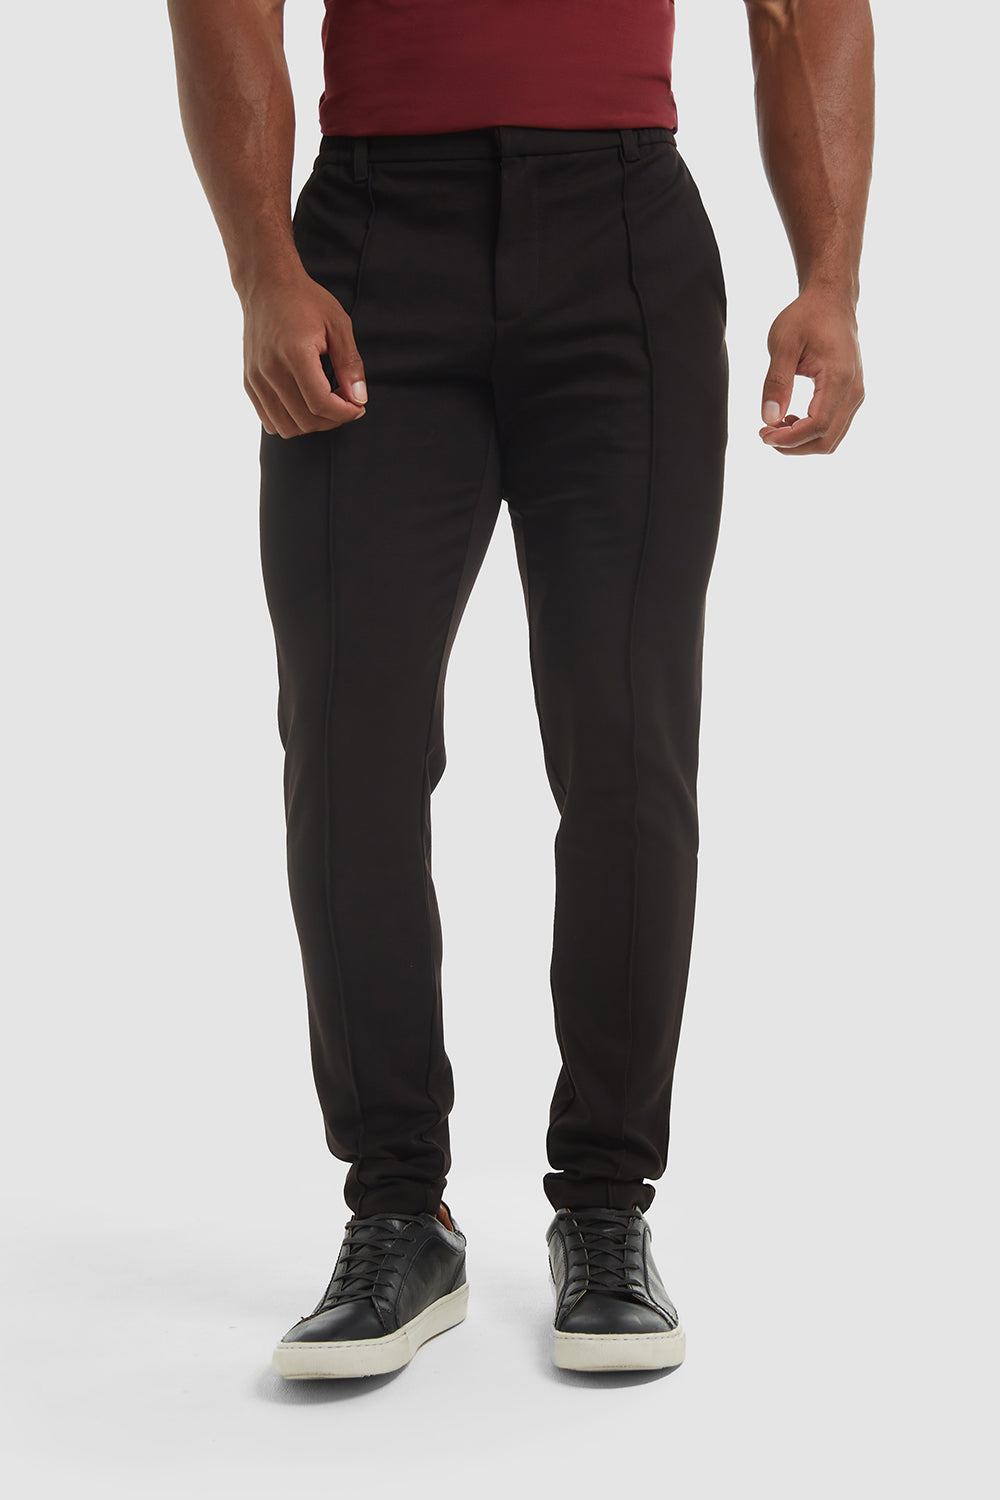 Stitched Crease Trousers in Black - TAILORED ATHLETE - ROW